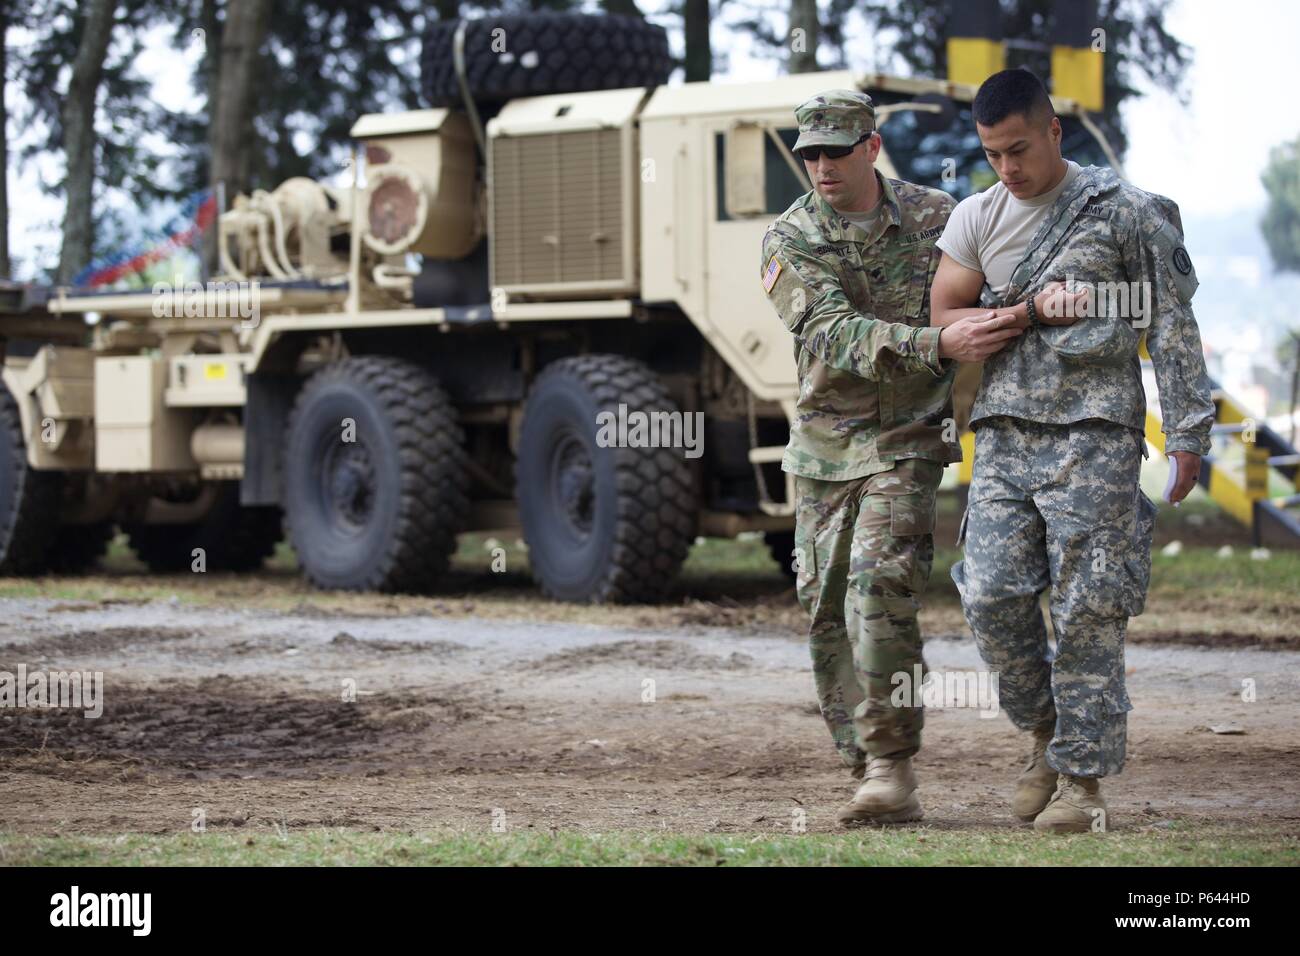 U.S. Army Spc. Brian Schwarts from the Medical Detachment helps Spc. Cesar Ahermado from the 115th Maintenance Company walk during a Mass Casualty Exercise as part of the Beyond The Horizon Operation at San Marcos, Guatemala, April 26, 2016. Task Force Red Wolf and Army South conducts Humanitarian Civil Assistance Training to include tactical level construction projects and Medical Readiness Training Exercises providing medical access and building schools in Guatemala with the Guatemalan Government and non-government agencies from 05MAR16 to 18JUN16 in order to improve the mission readiness of Stock Photo